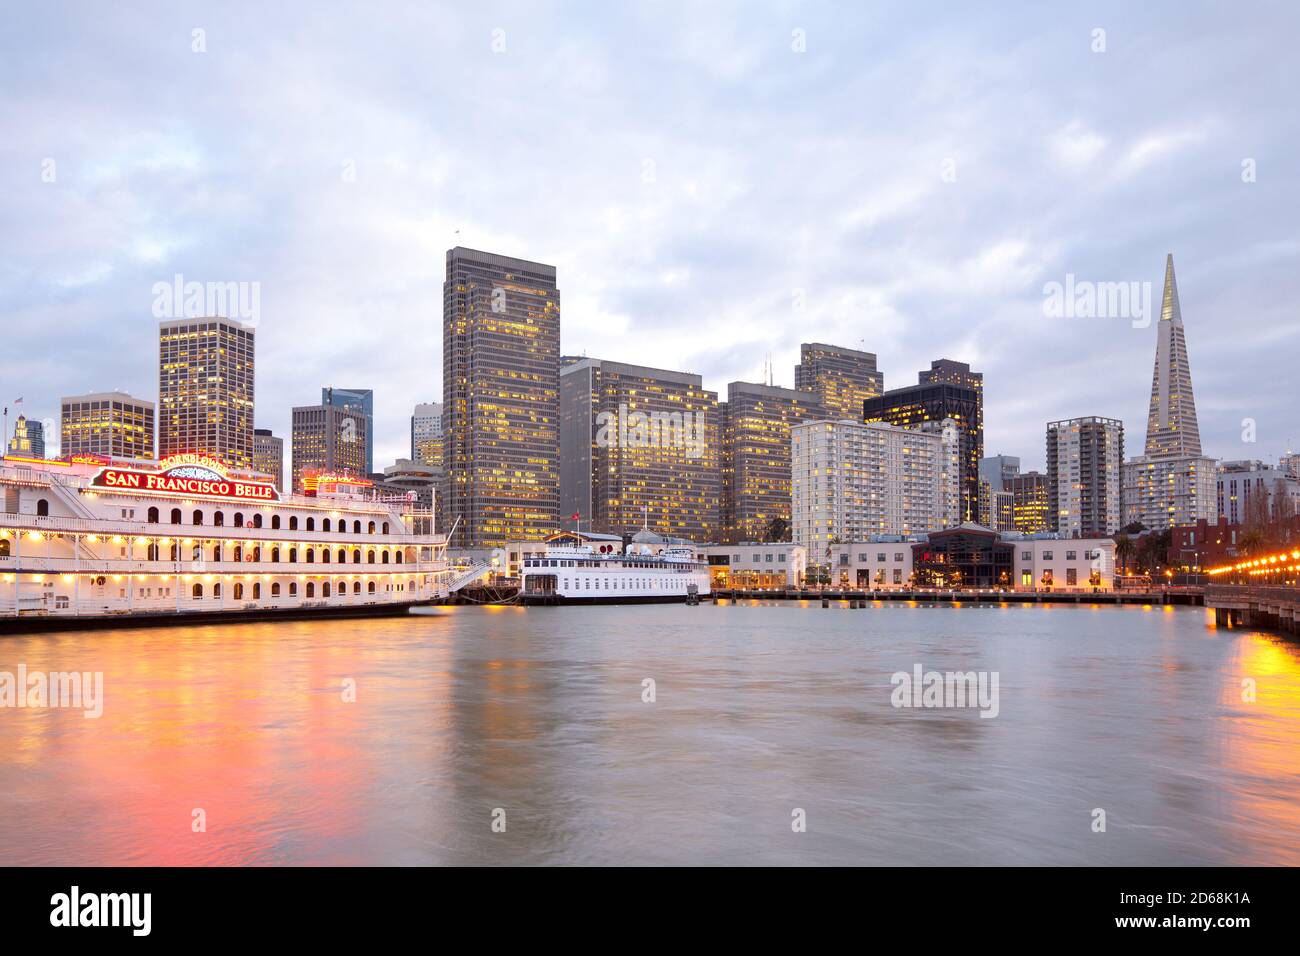 San Francisco, California, United States - Skyline of buildings at downtown from Embarcadero in Pier 7. Stock Photo